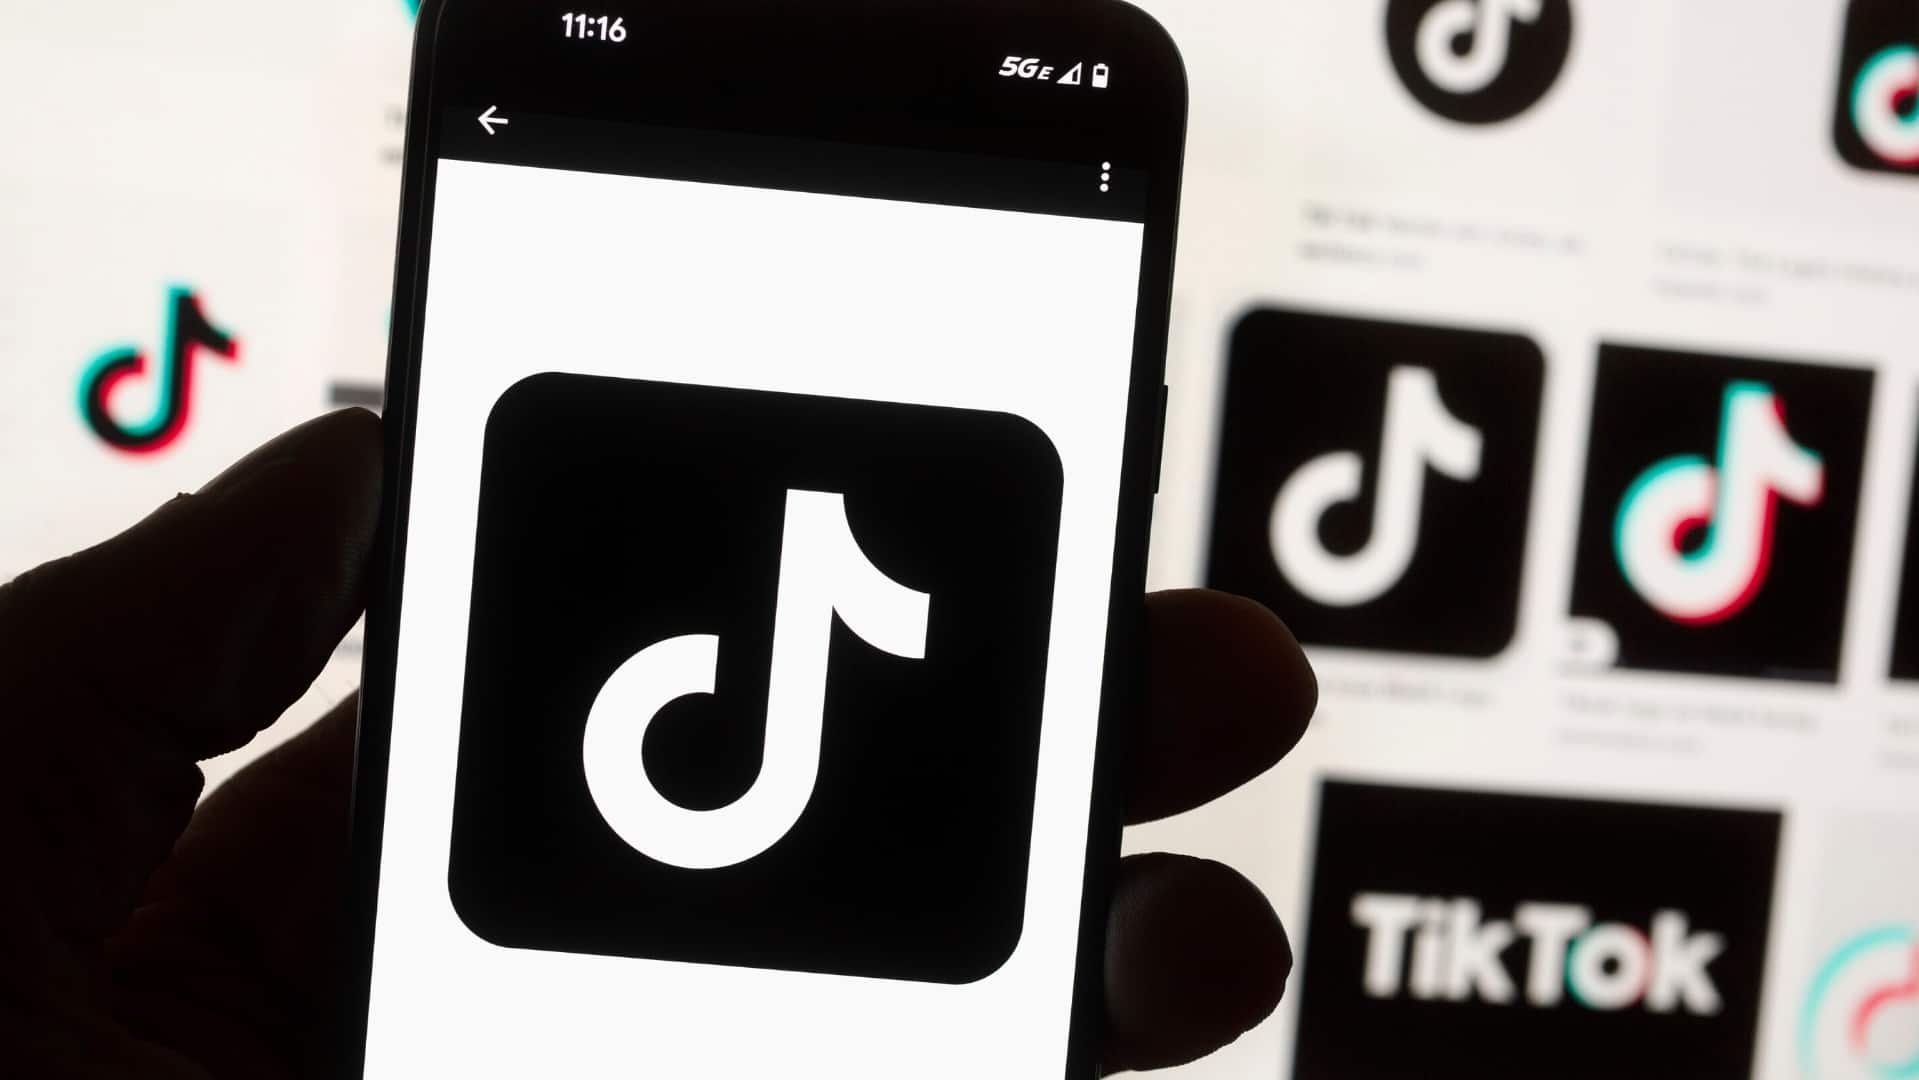 ottawa still advertising on tiktok despite banning it on government devices due to security concerns 2